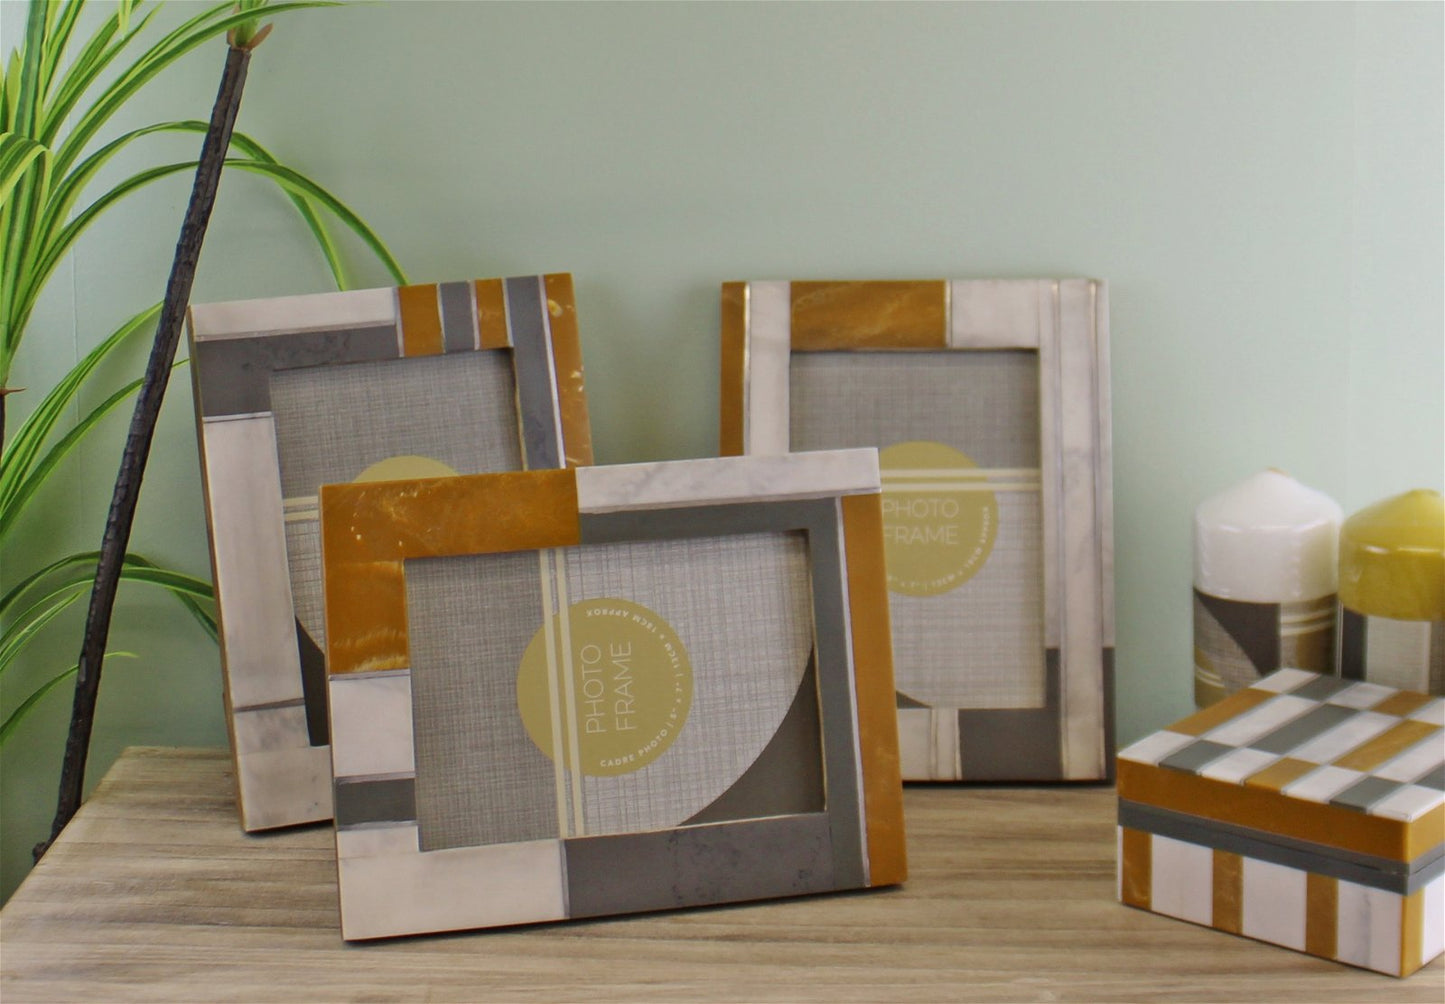 Set of 3 Abstract Design Photo Frames, 5x7